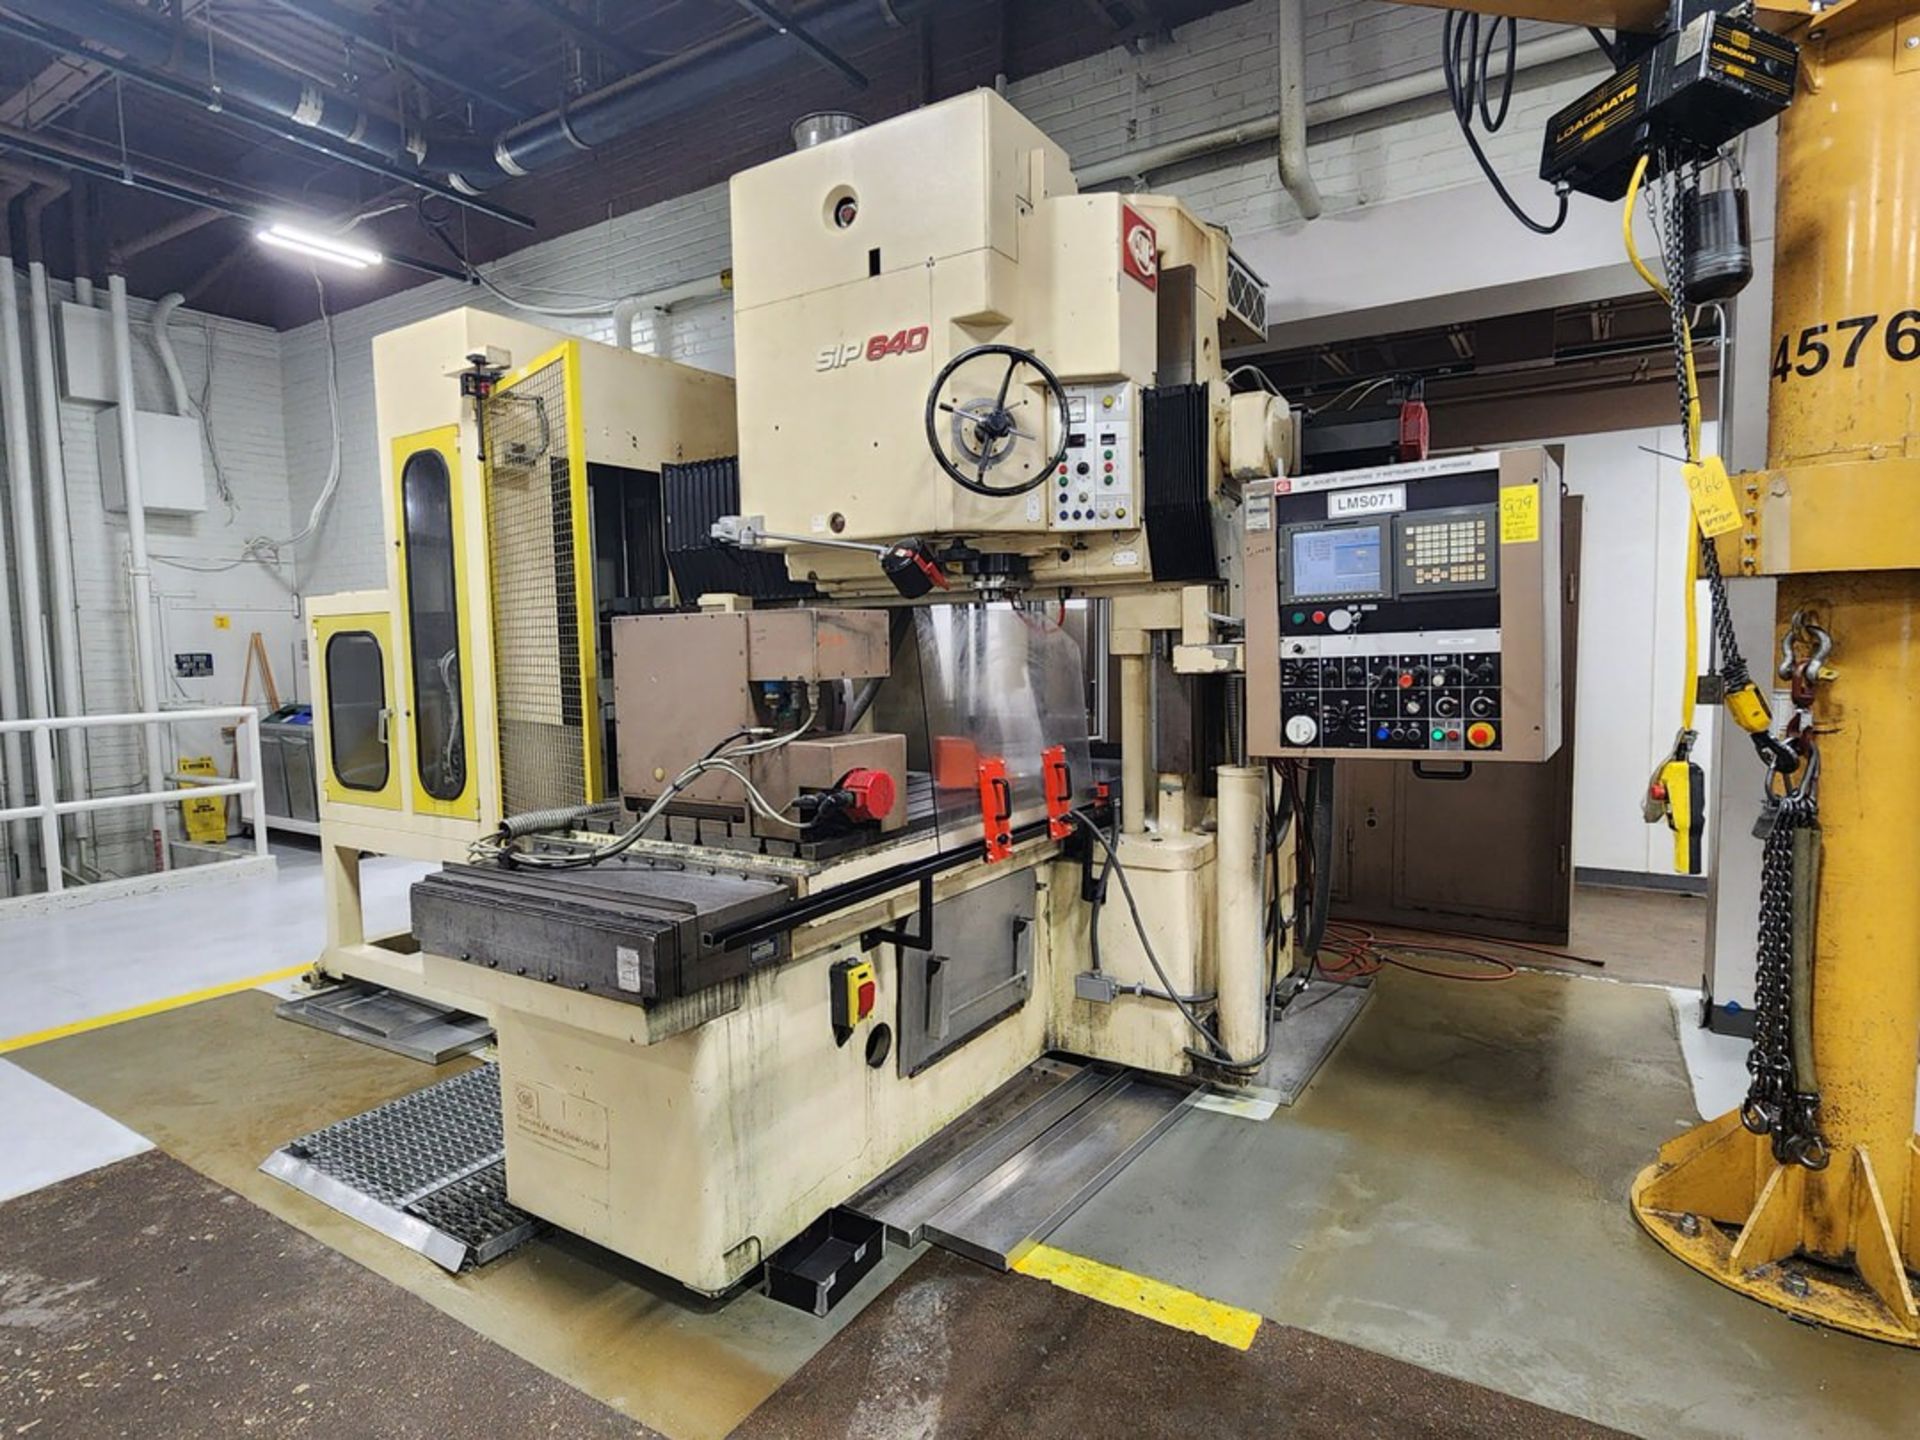 SIP SIP-640 Jig Boring Machine W/ Fanuc Series 16i-M Controller; Cutting Time: 15,304hrs - Image 2 of 36